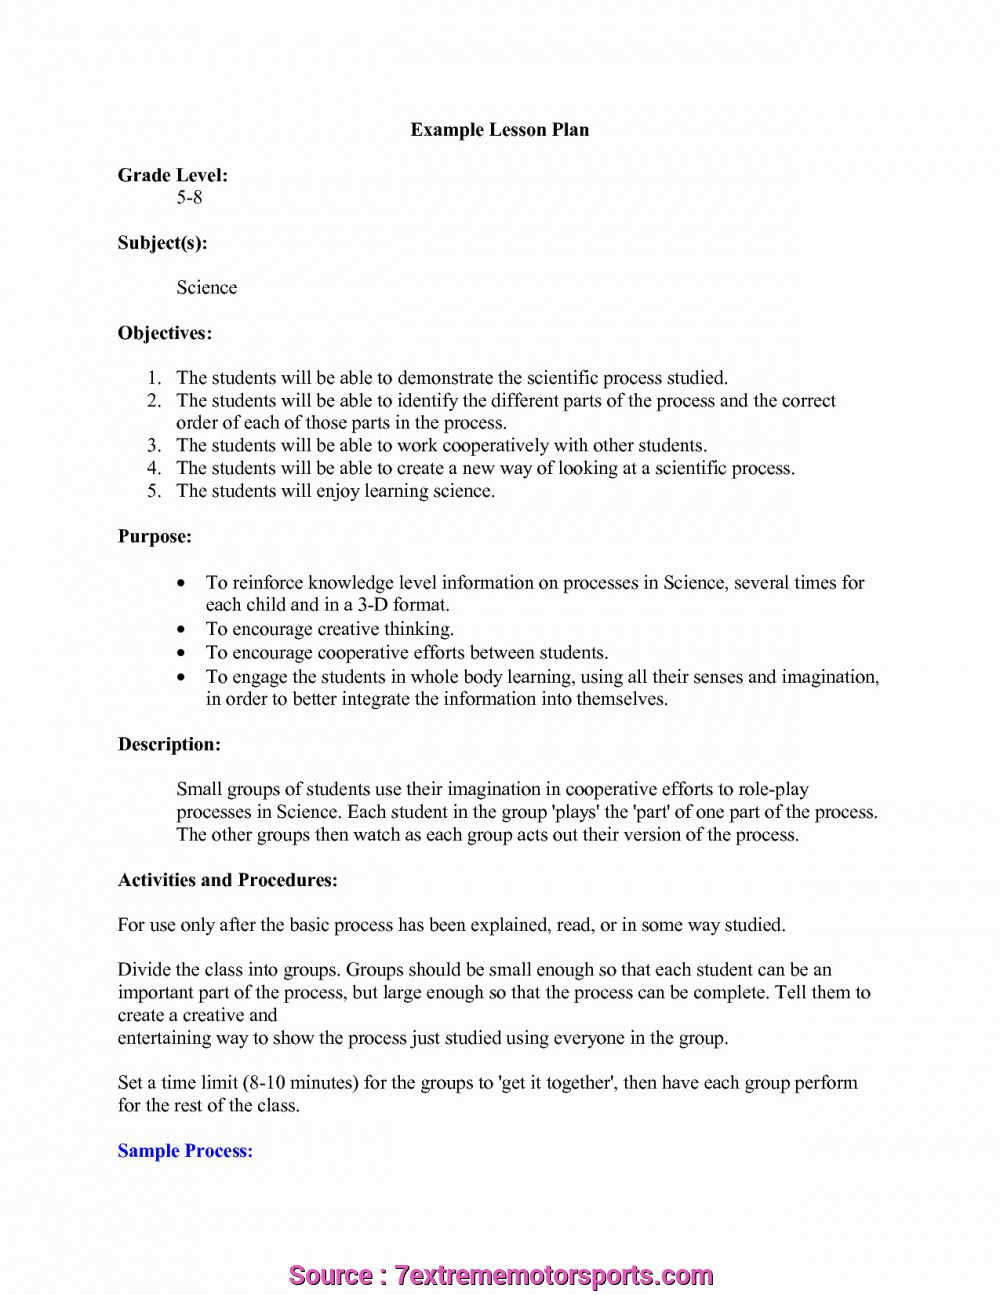 Lesson Plan Objectives Examples Lesson Plan Template with Objectives top 2 Fantastic